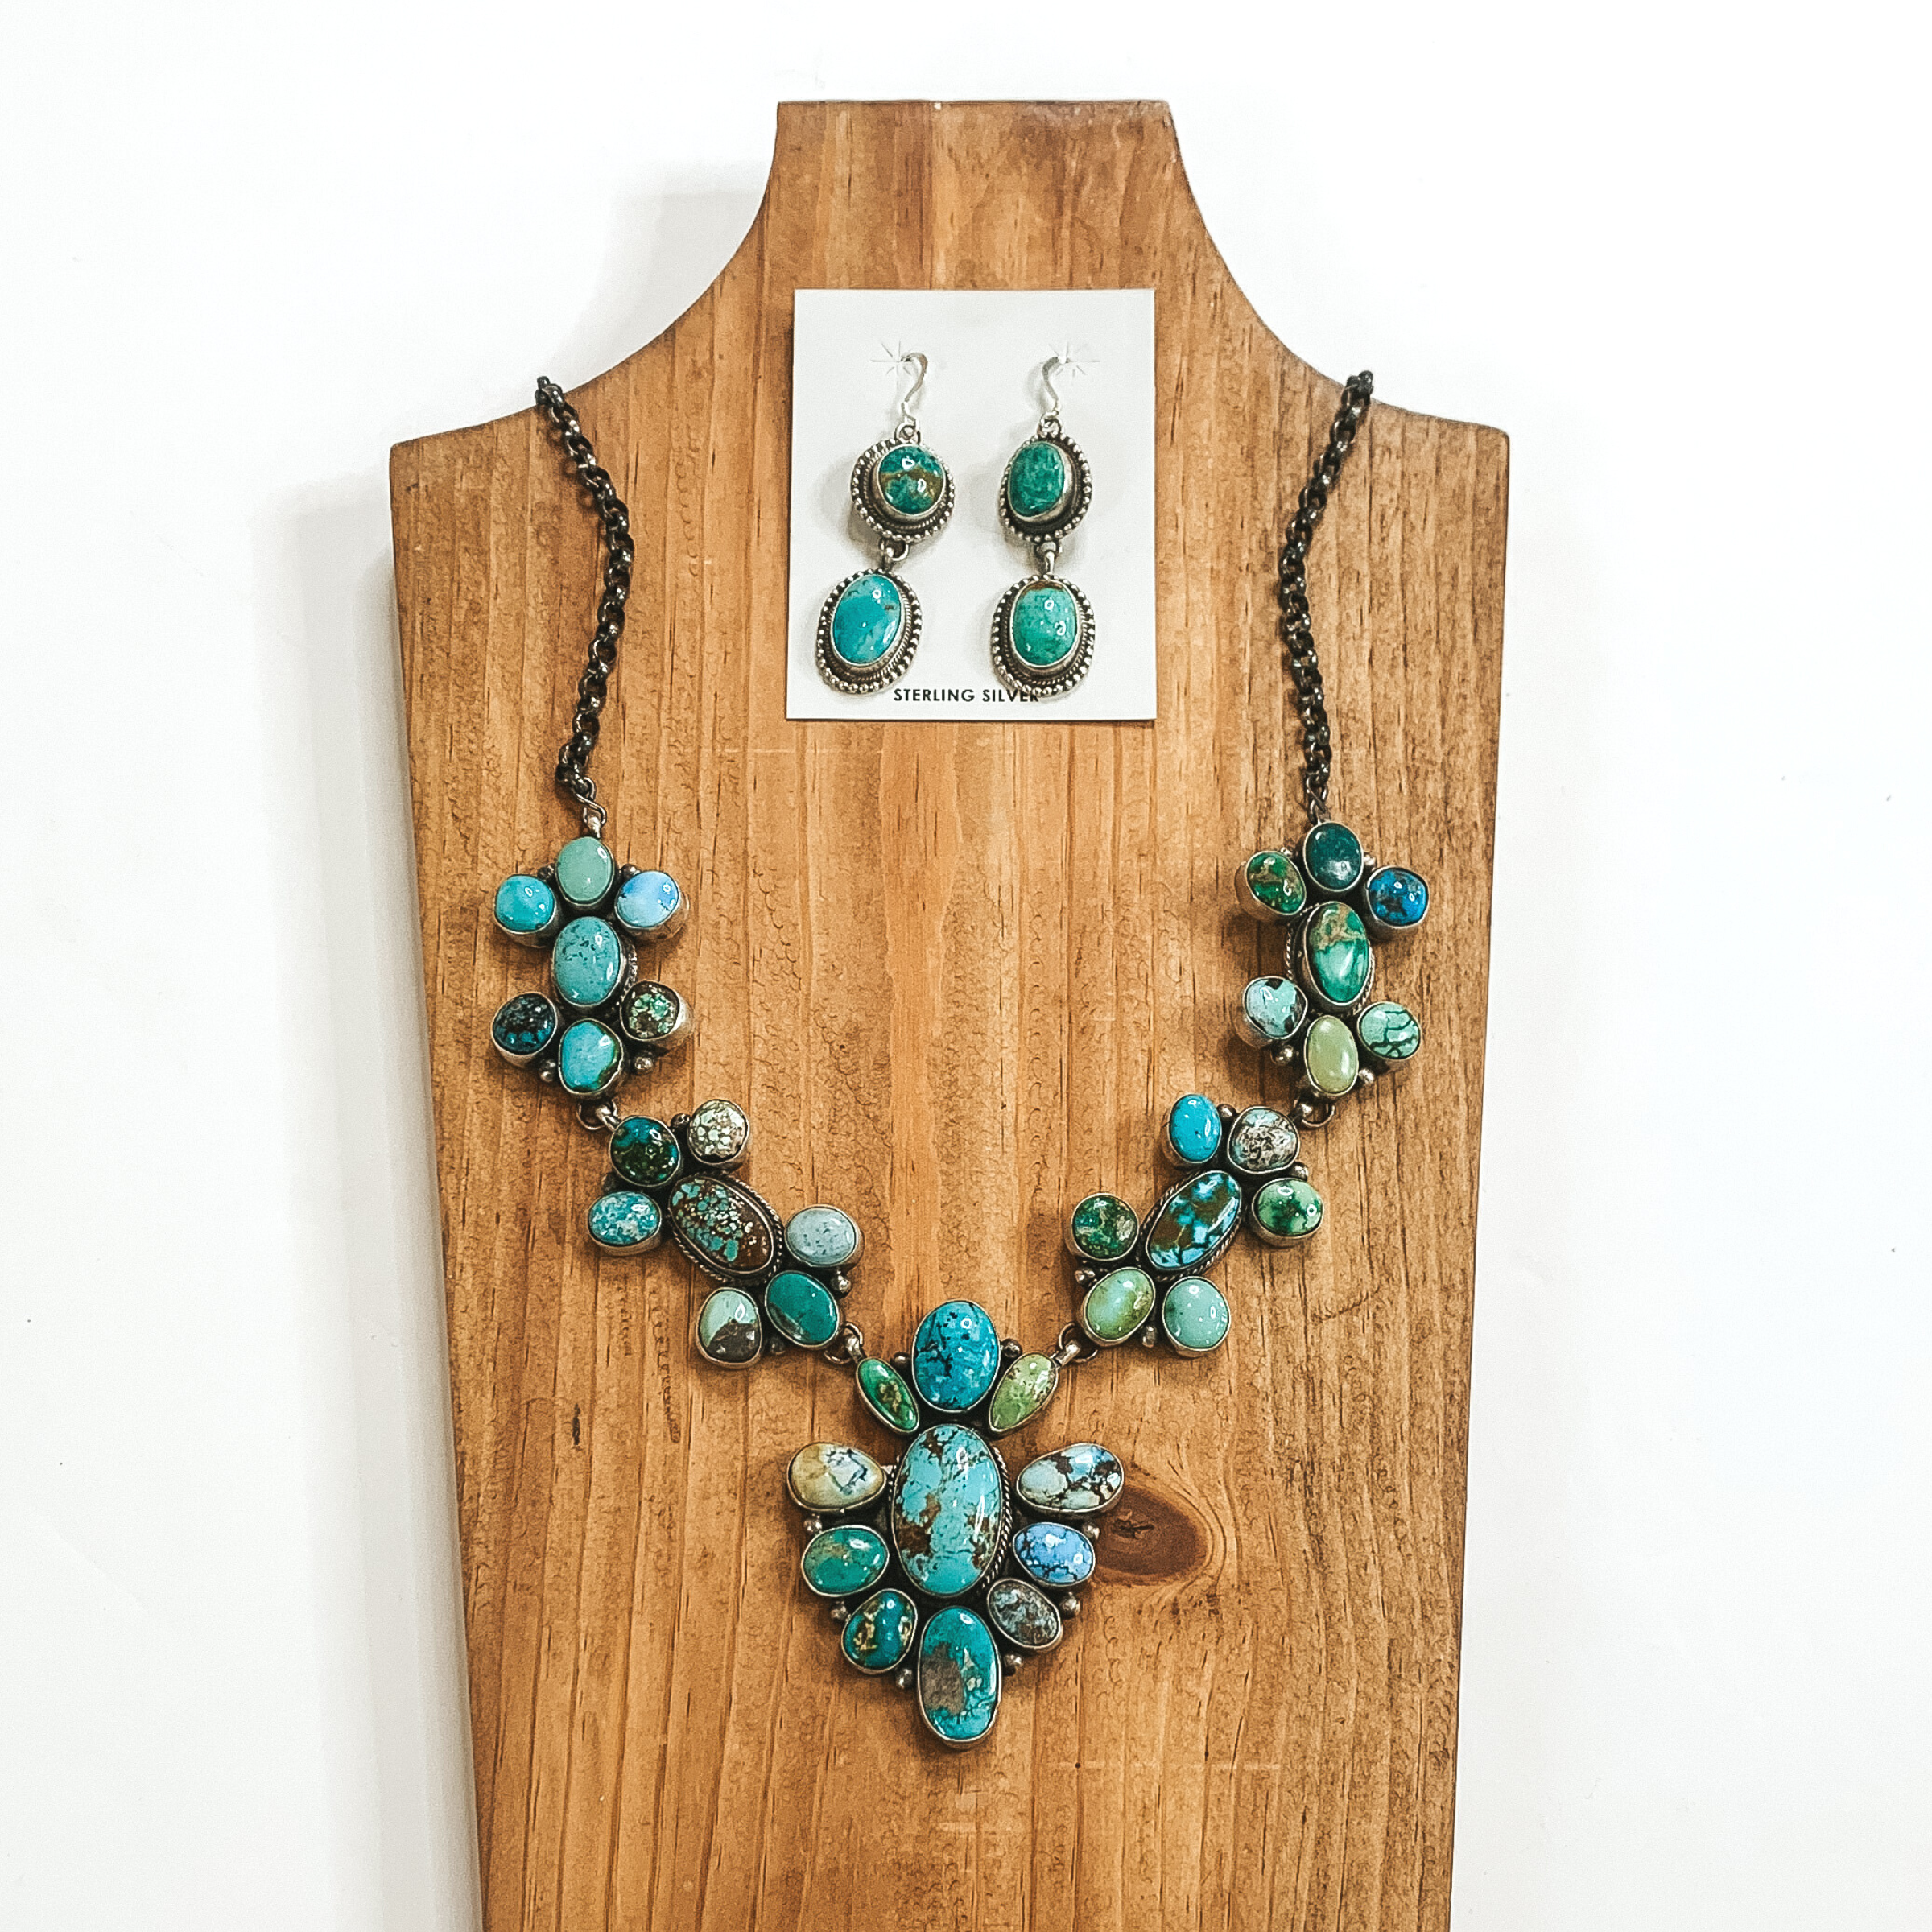 Jeff James | Navajo Handmade Sterling Silver Necklace with Kingman, Royston, and Golden Hills Turquoise Stones + Matching Earrings - Giddy Up Glamour Boutique